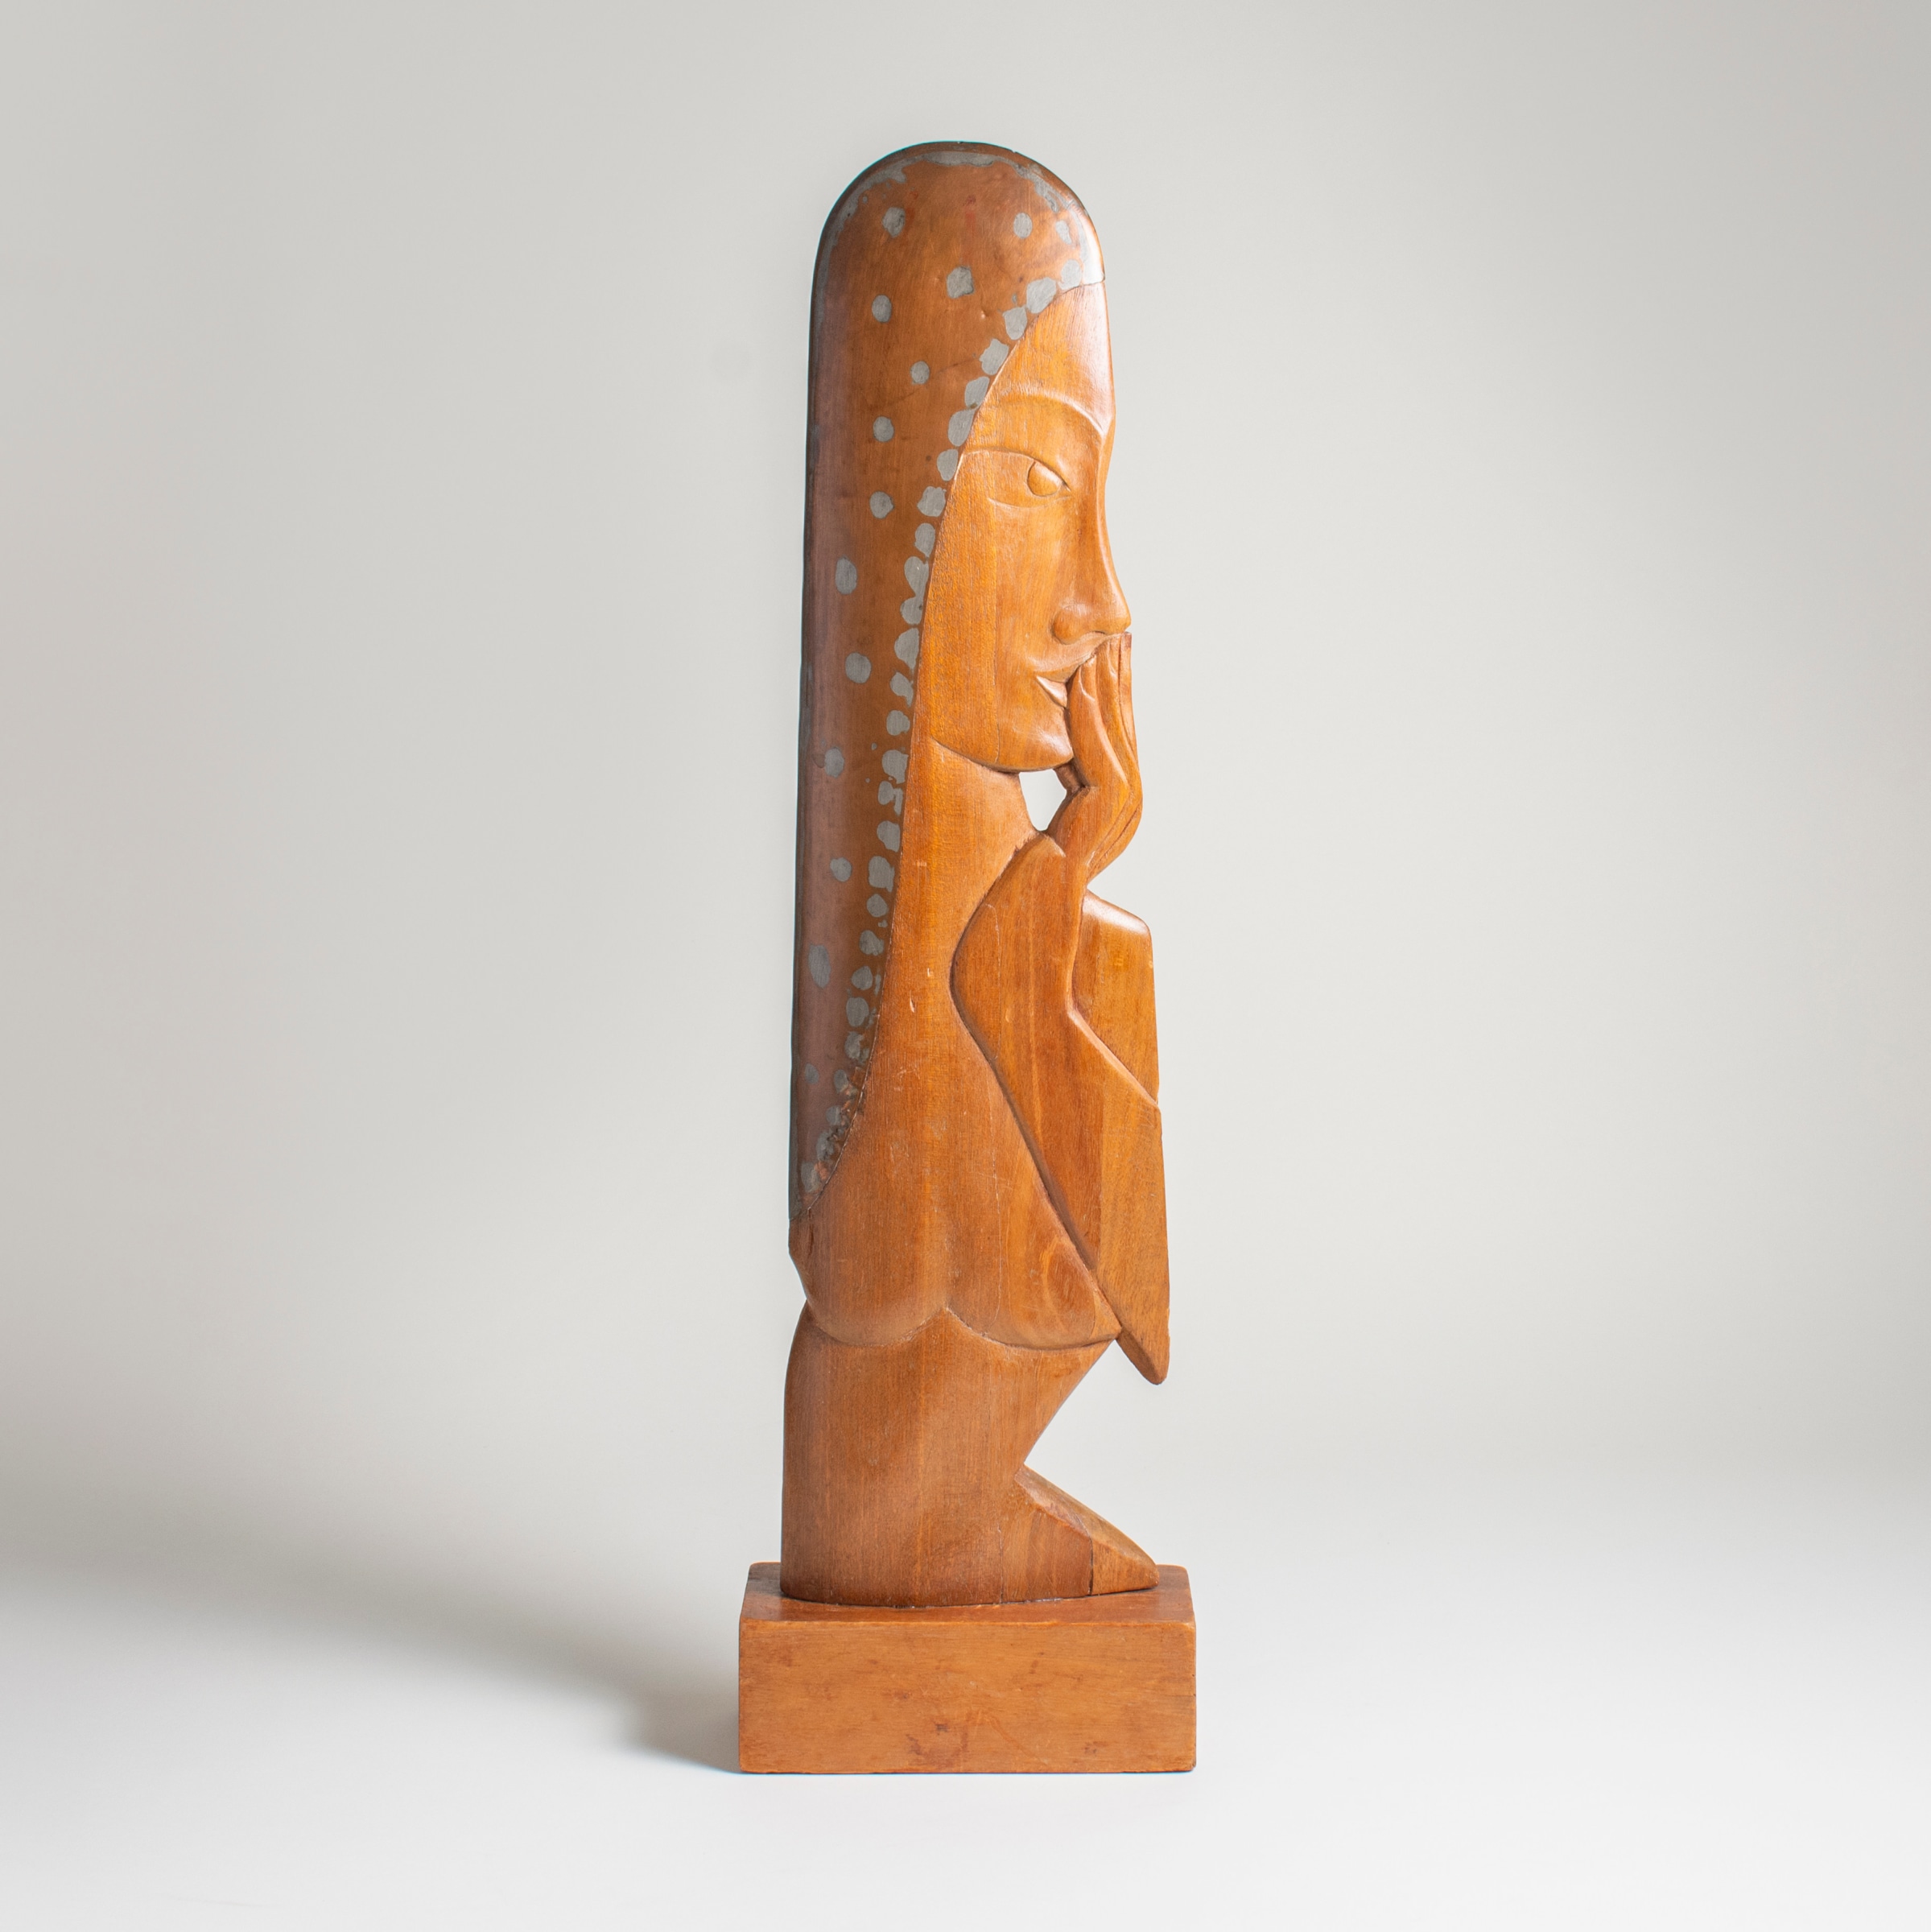 an unusual midcentury sculpture titled anxiety, of a woman with stylized features carved out of wood, holding her hand up to her mouth, her &quot;hair&quot; formed by a found plane propeller - the metal contrasting with the carved wood.